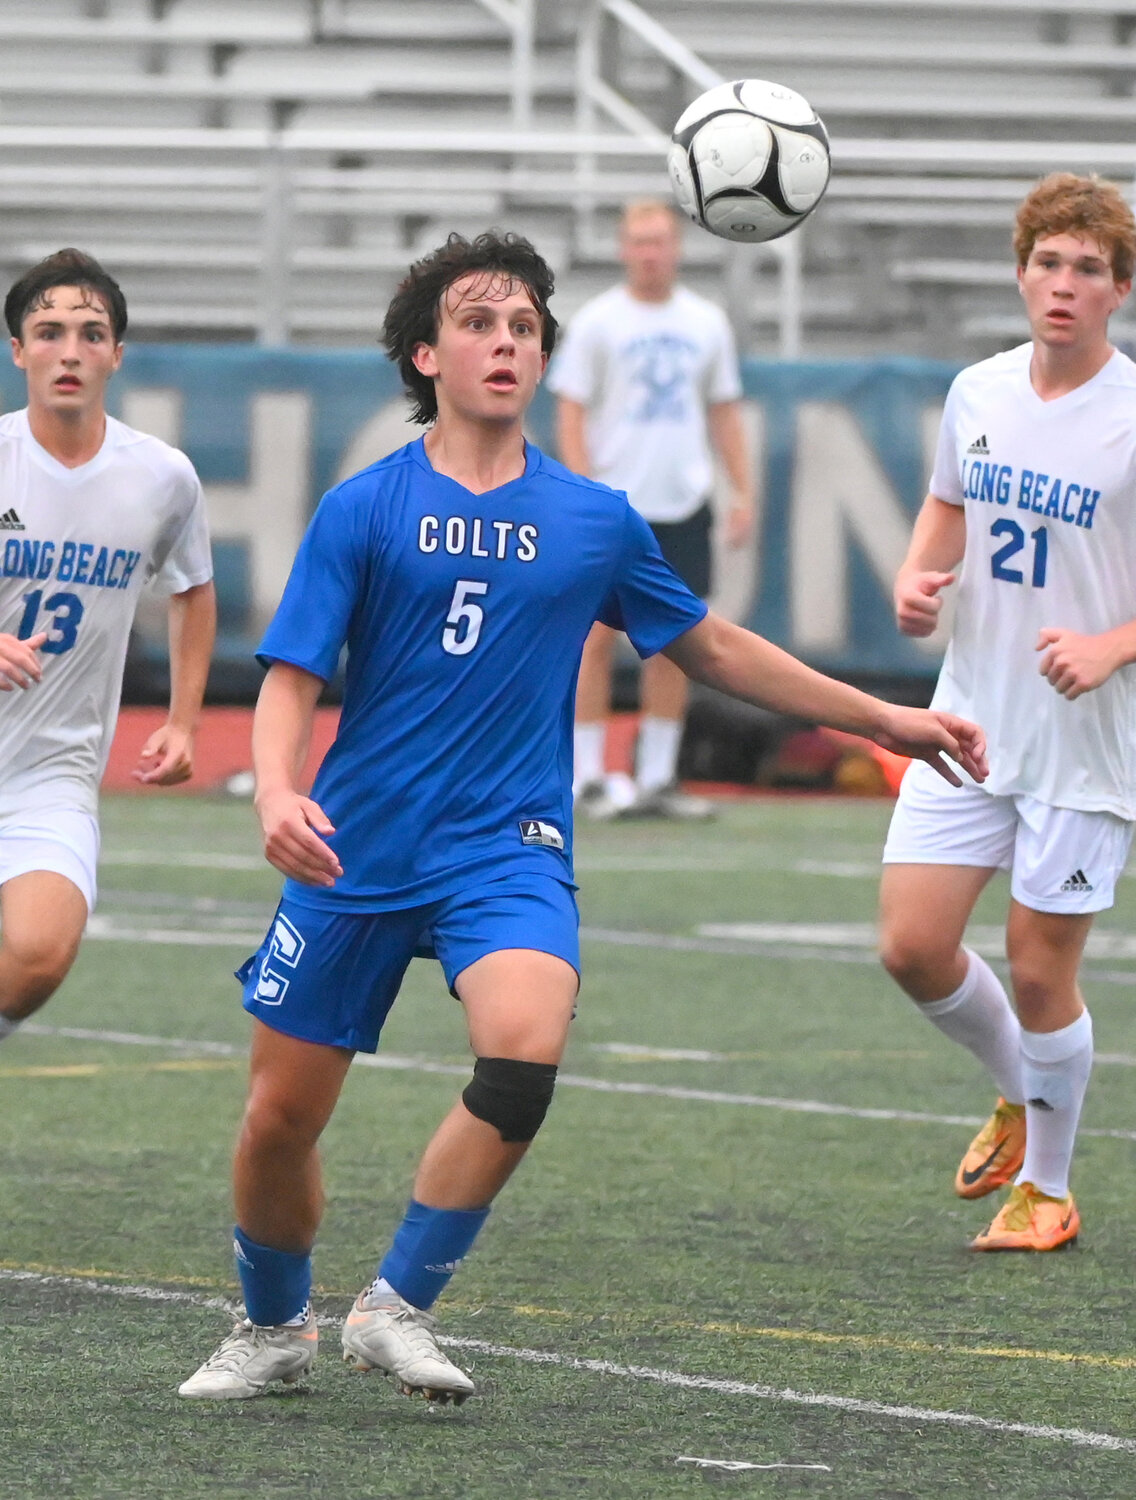 Junior Matt Borgese, center, excelled as a defensive midfielder in 2022 and will serve as one of the Colts’ center backs this season.